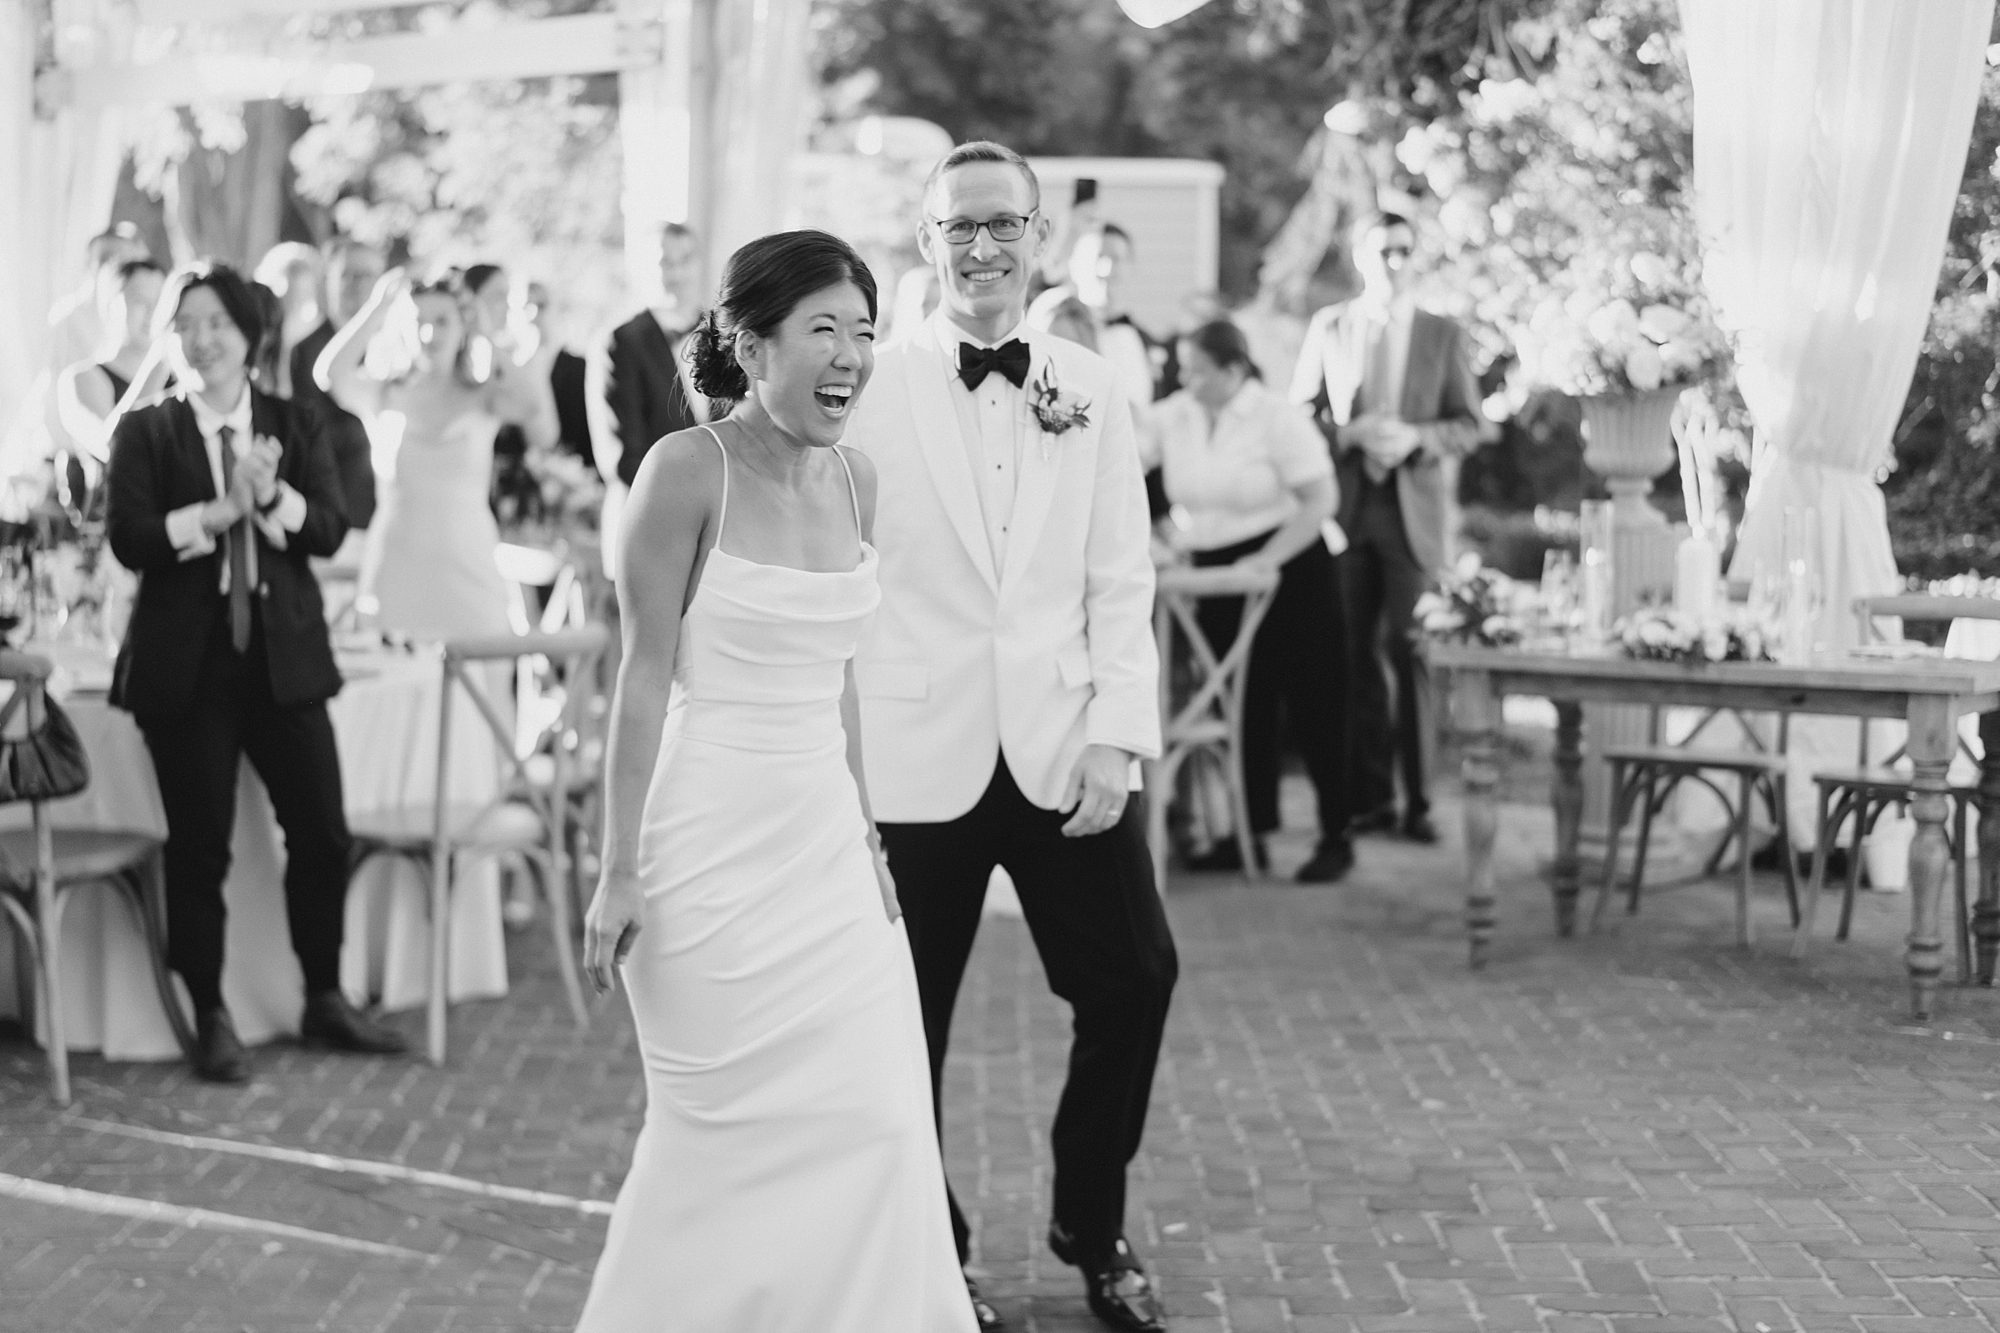 couple laugh together at wedding reception